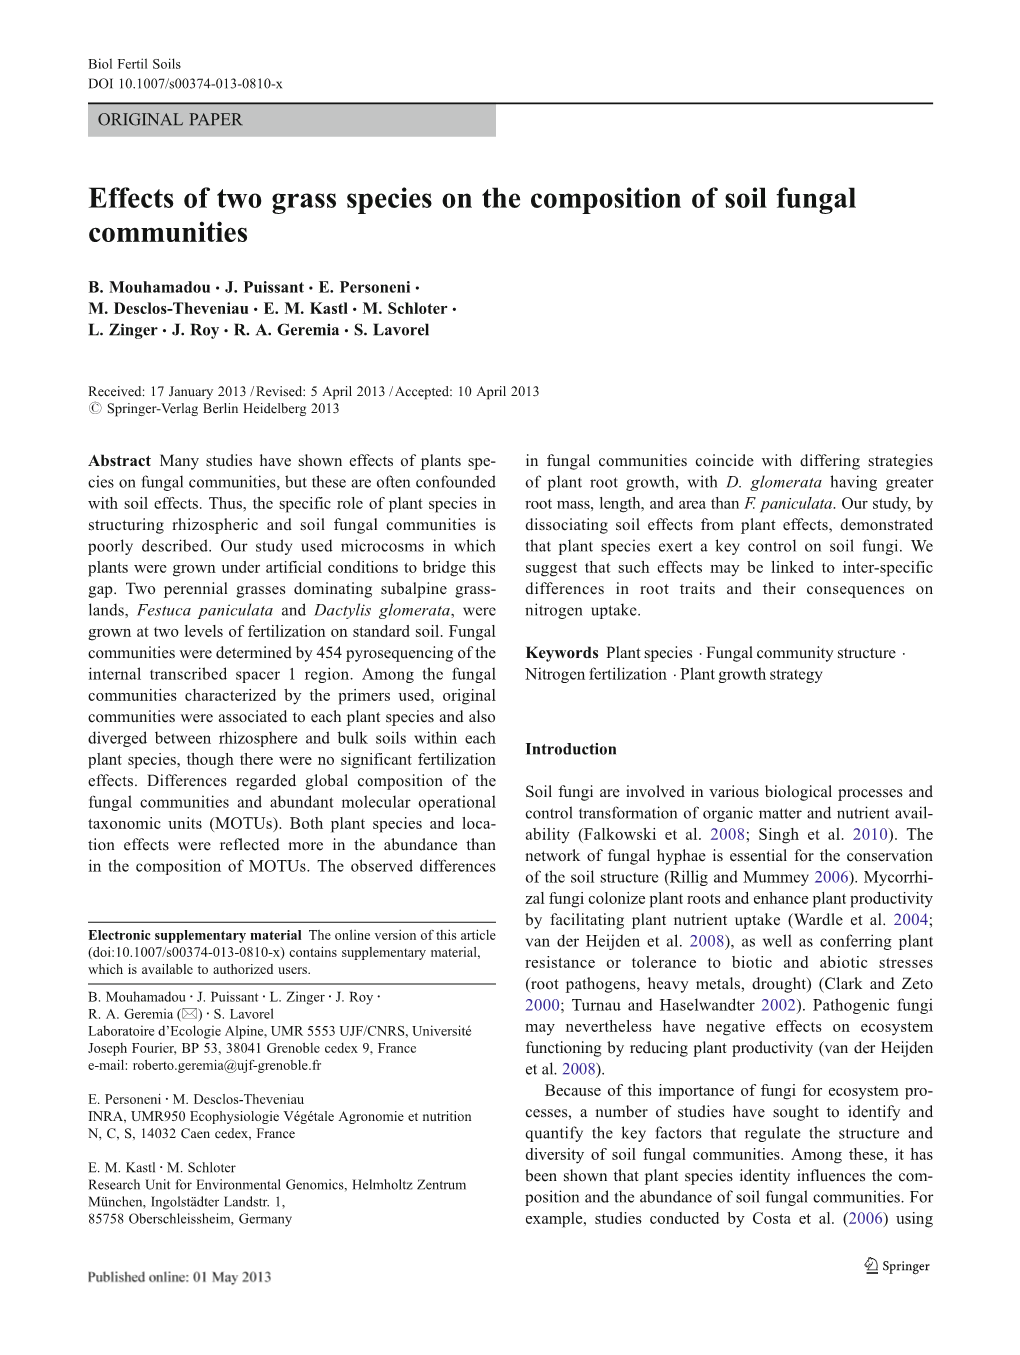 Effects of Two Grass Species on the Composition of Soil Fungal Communities